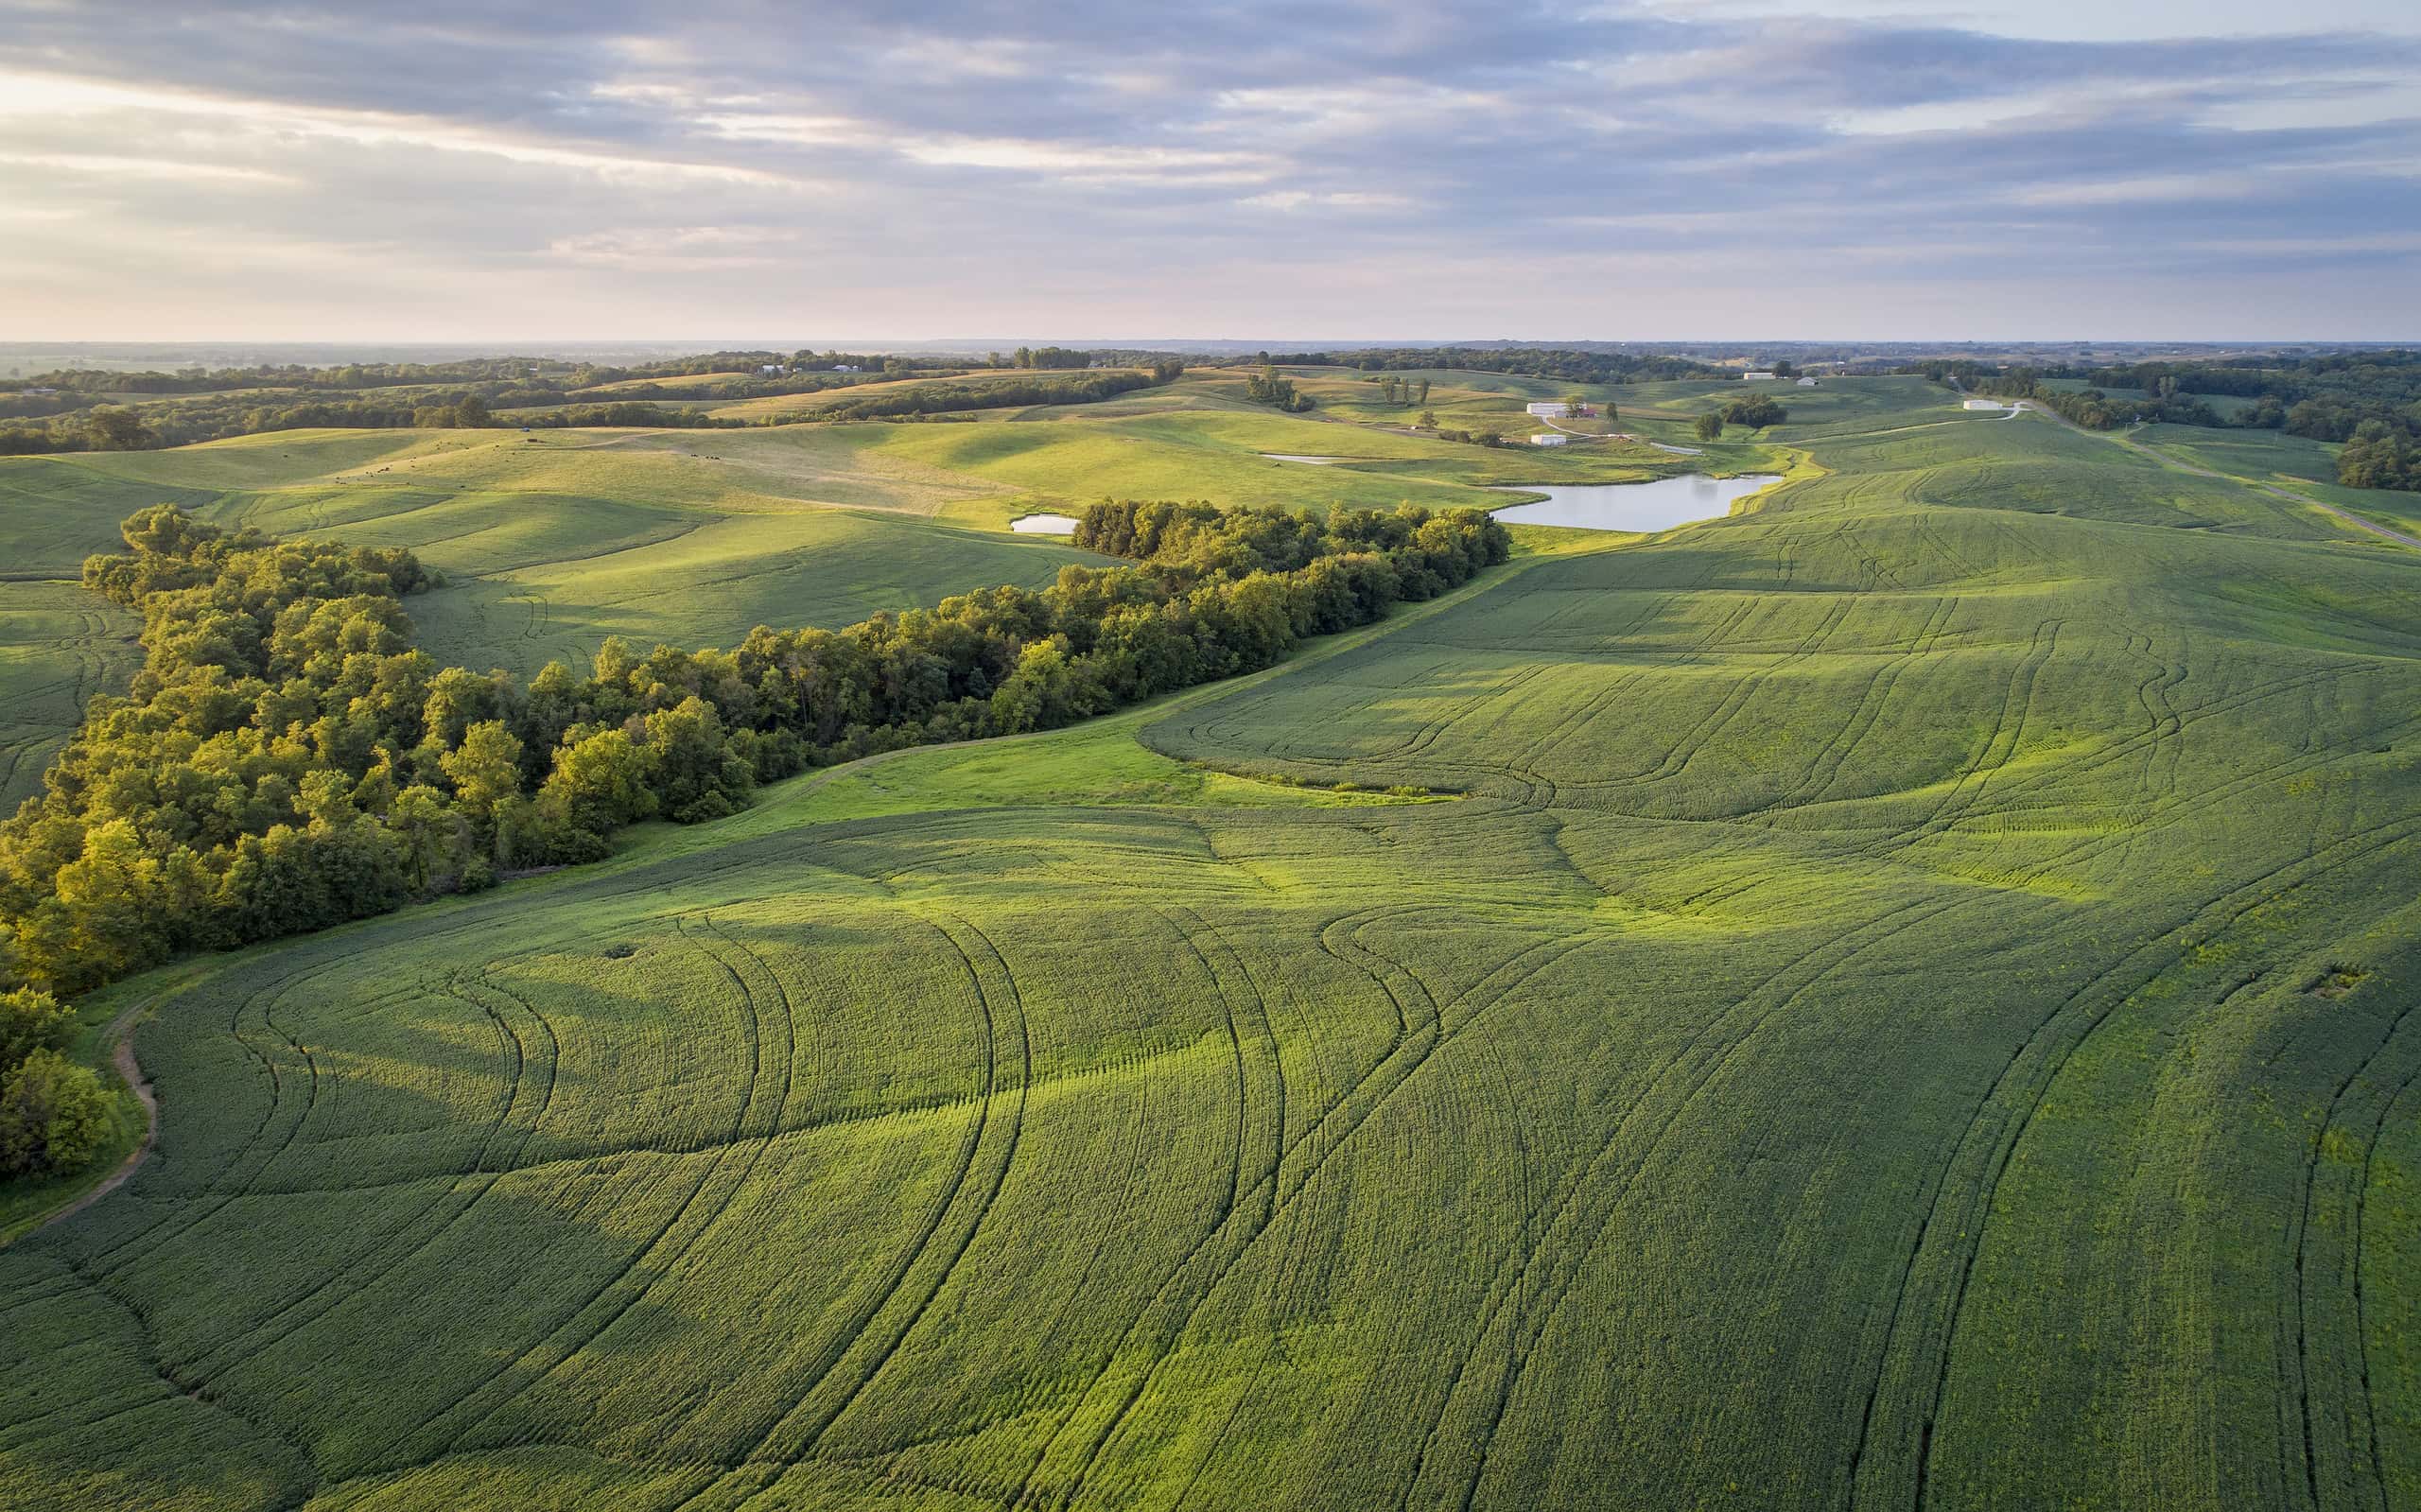 aerial view of green soybean fields s in a valley of the Missouri River, near Glasgow, MO, late summer